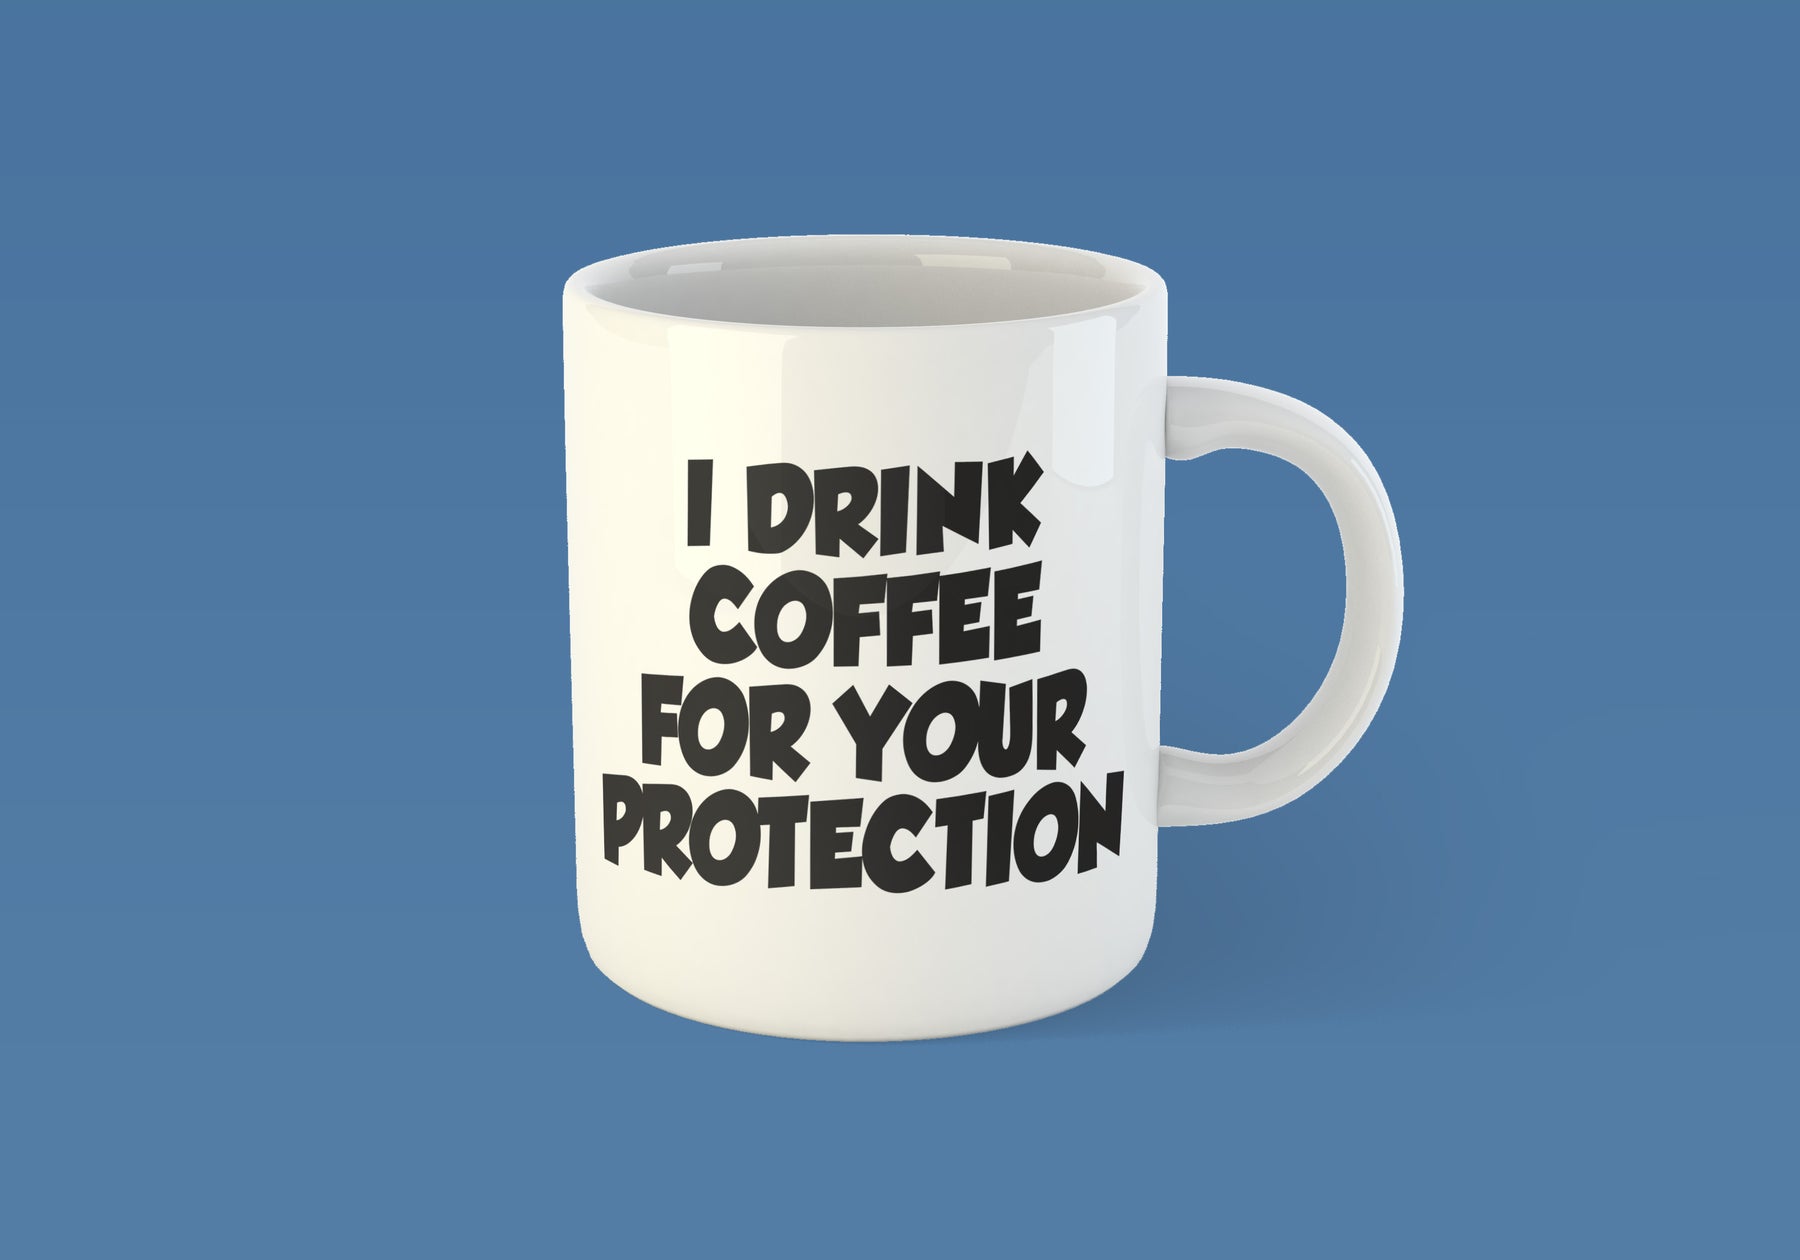 I drink coffee for you protection